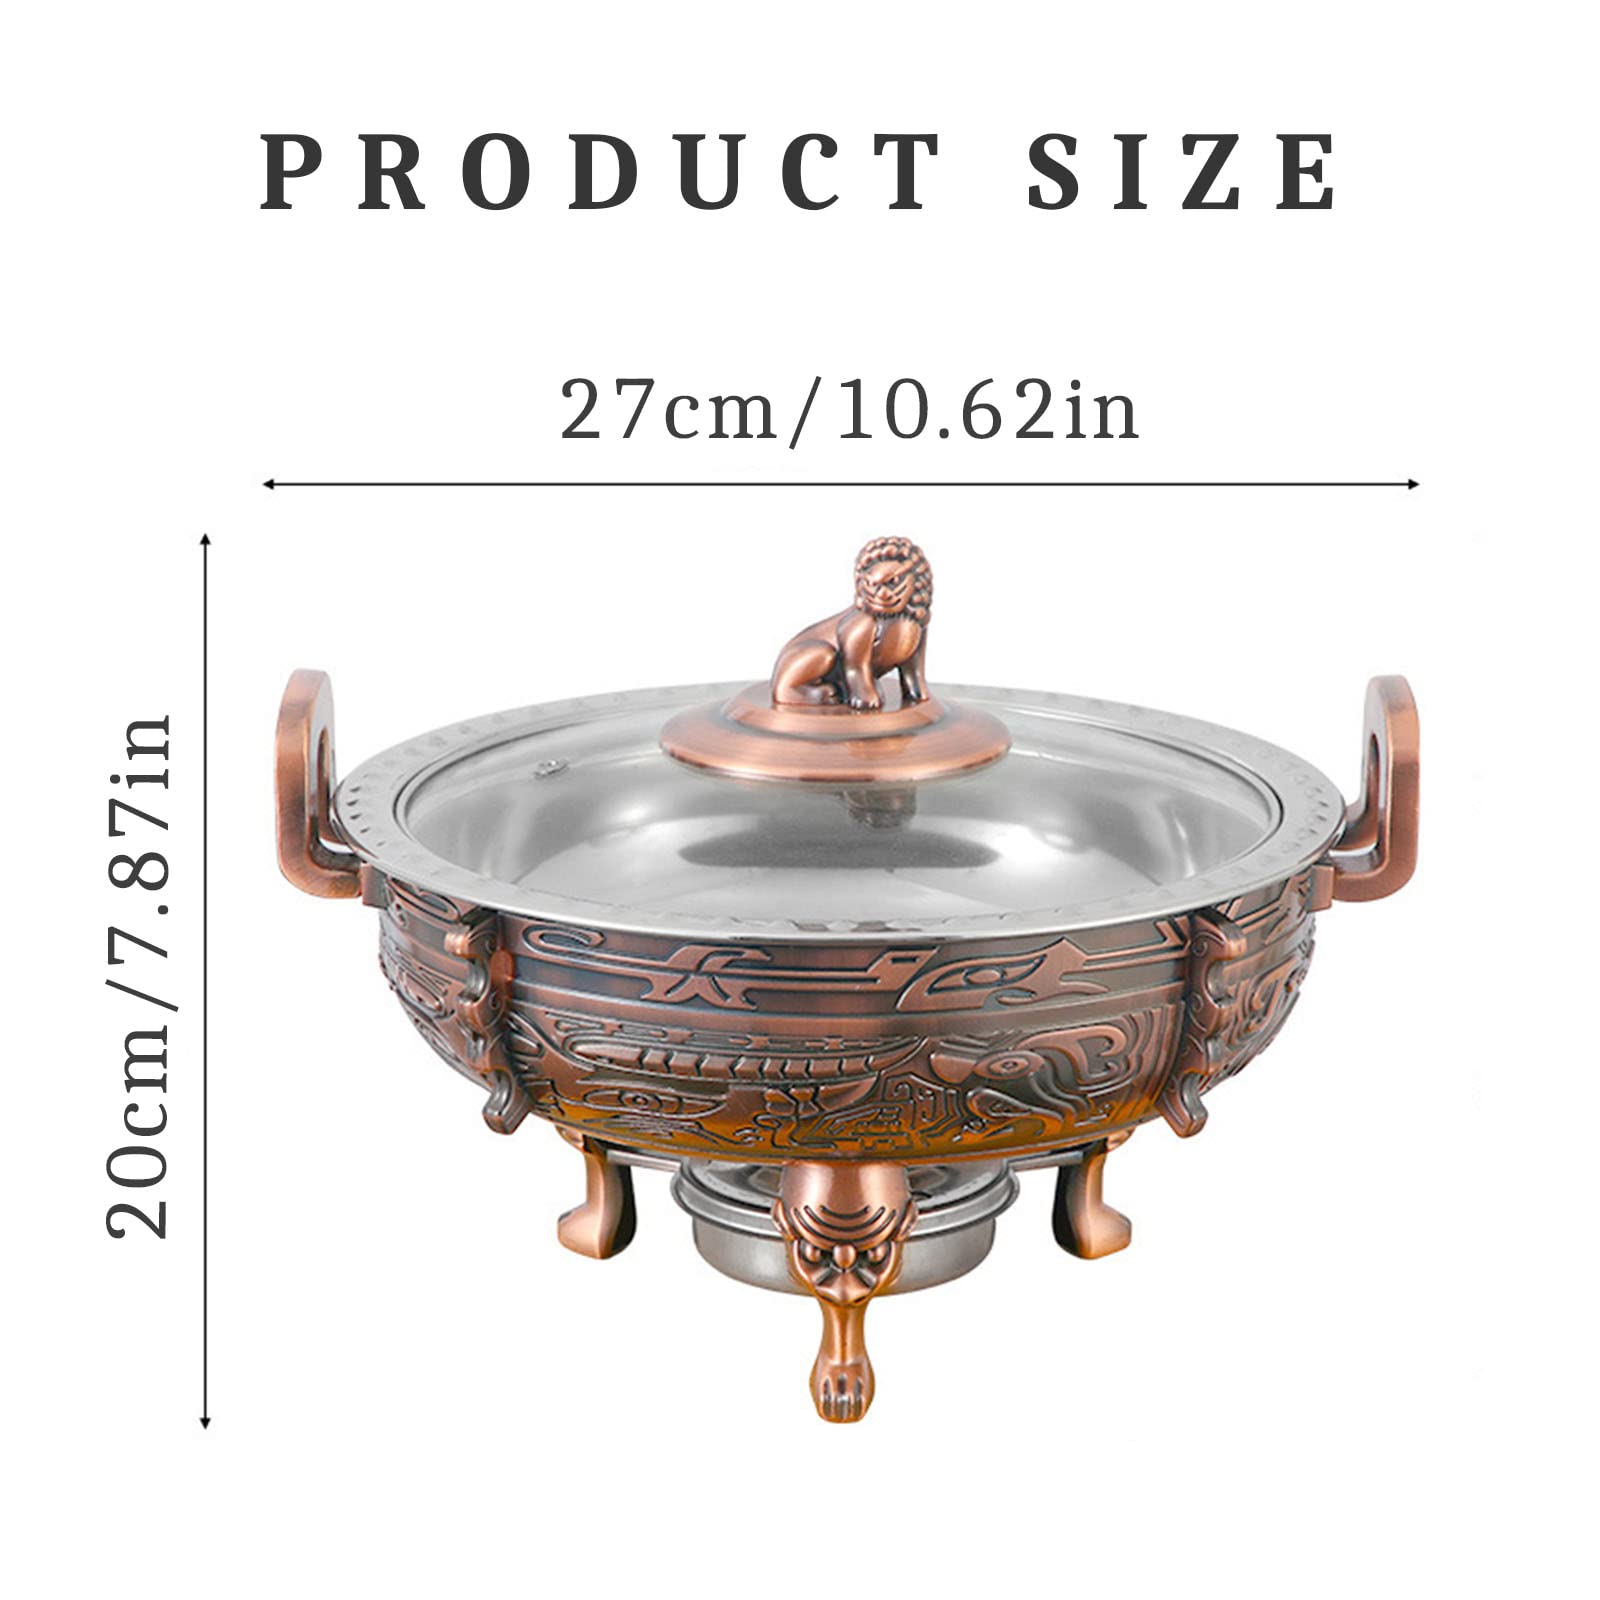 2/4 Pack Chafing Dishes & Food Warmers, Round Chafer Catering Buffet Server Set with Food Pan and Fuel Holders, for Kitchen Party Dining Buffet (Red Bronze),2 Pack